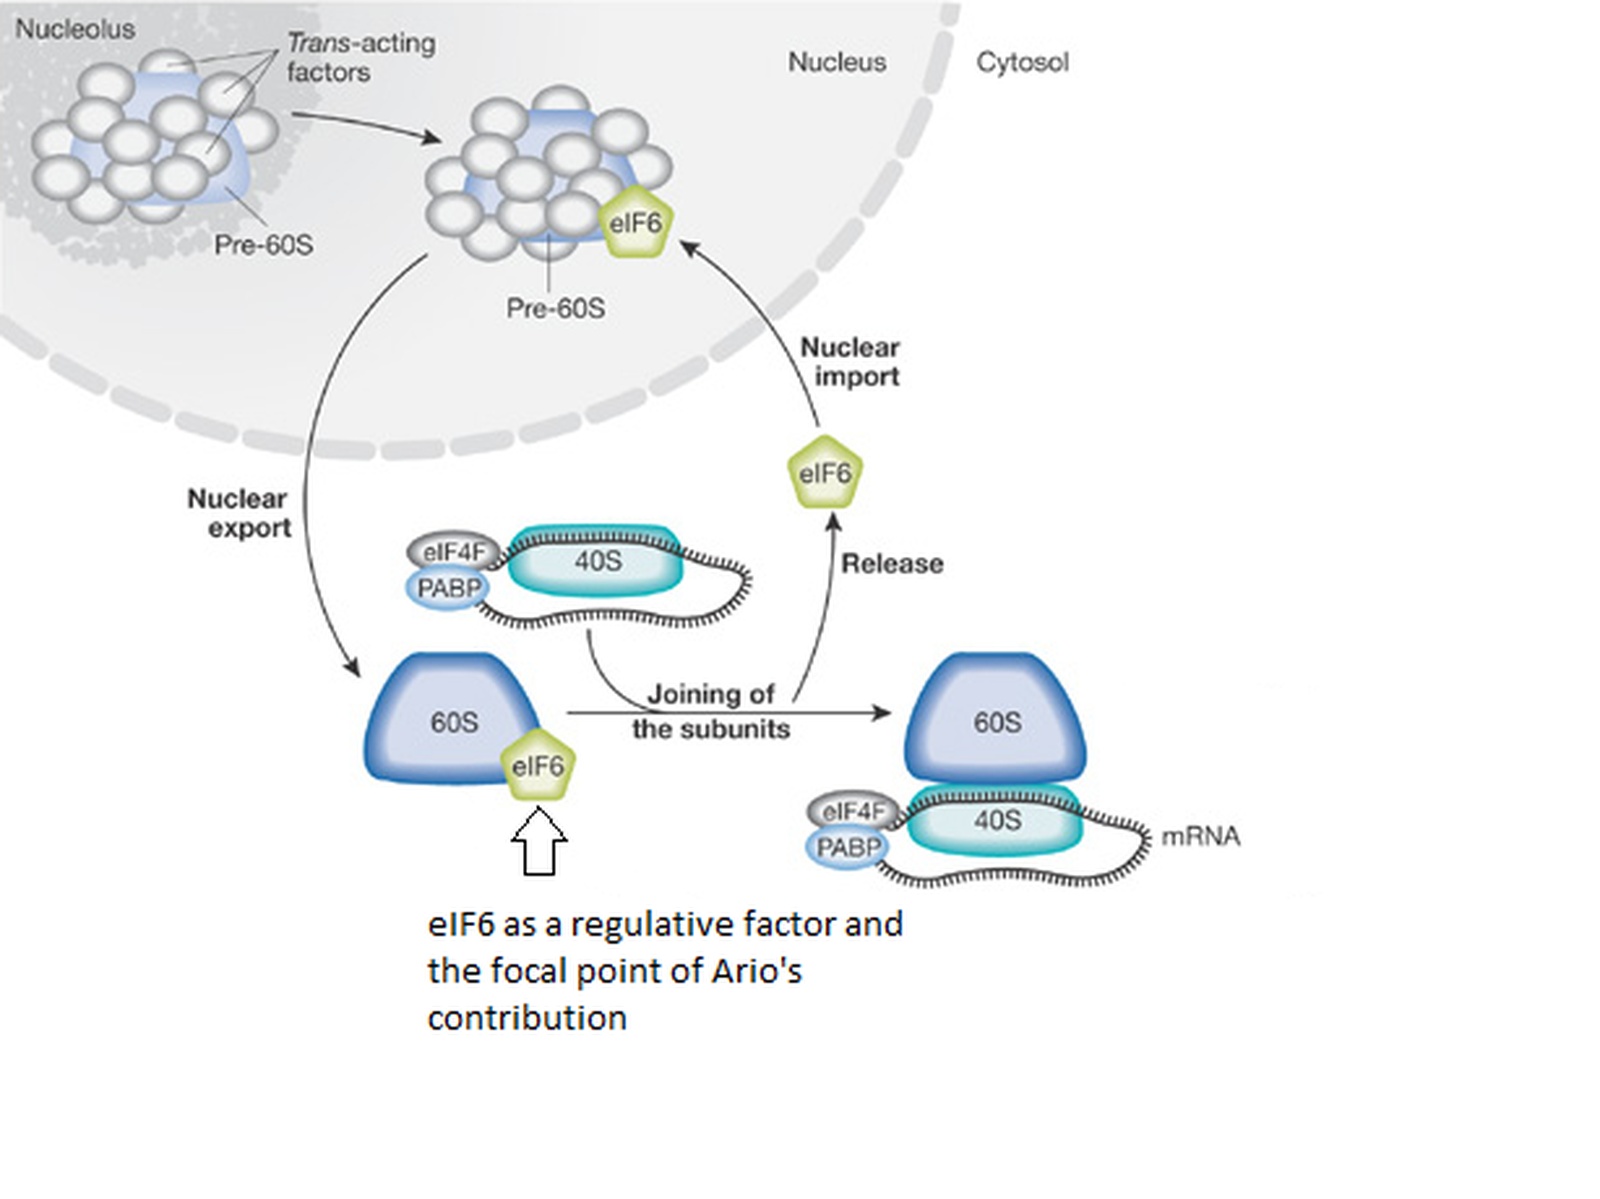 The role of the regulatory eIF6 protein in the tumorogenesis, Courtesy of Mulizio, 2009.